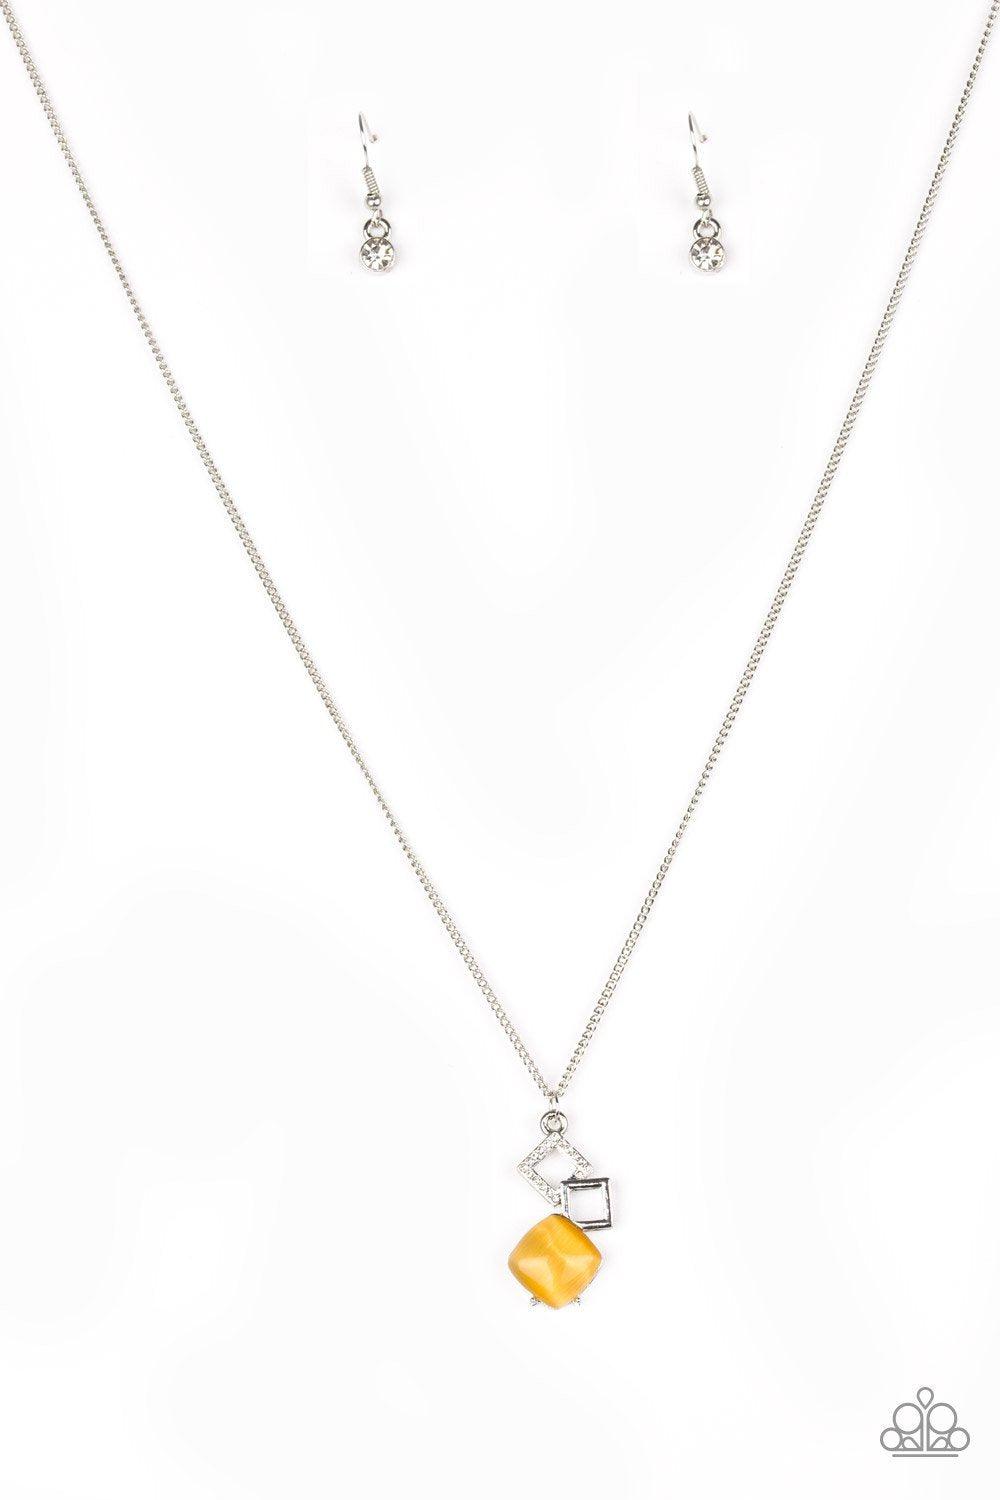 Stylishly Square Yellow Moonstone Necklace - Paparazzi Accessories-CarasShop.com - $5 Jewelry by Cara Jewels